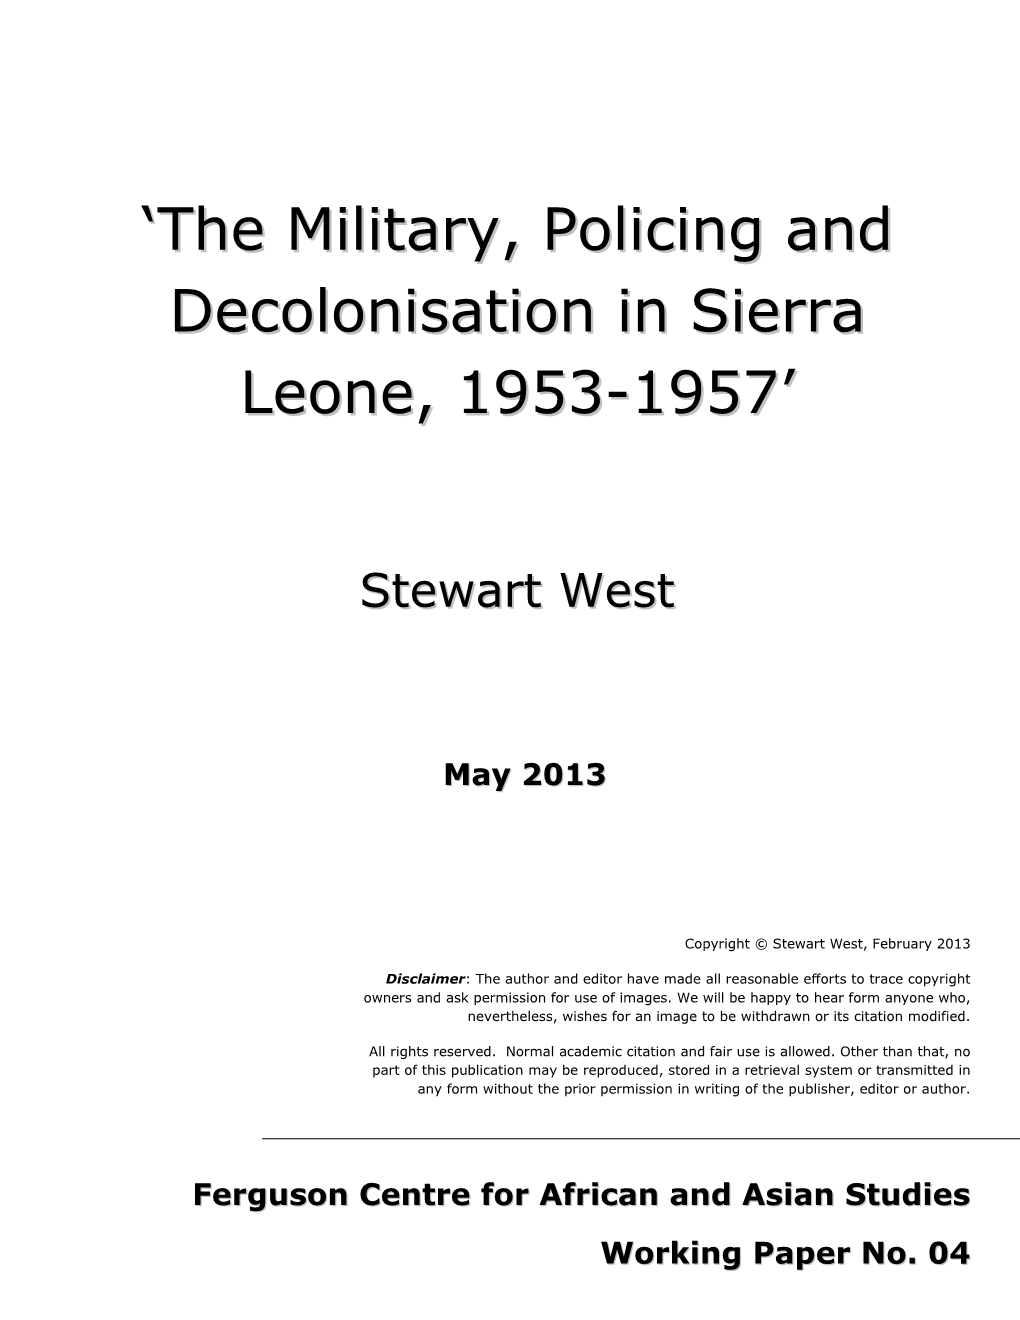 'The Military, Policing and Decolonisation in Sierra Leone